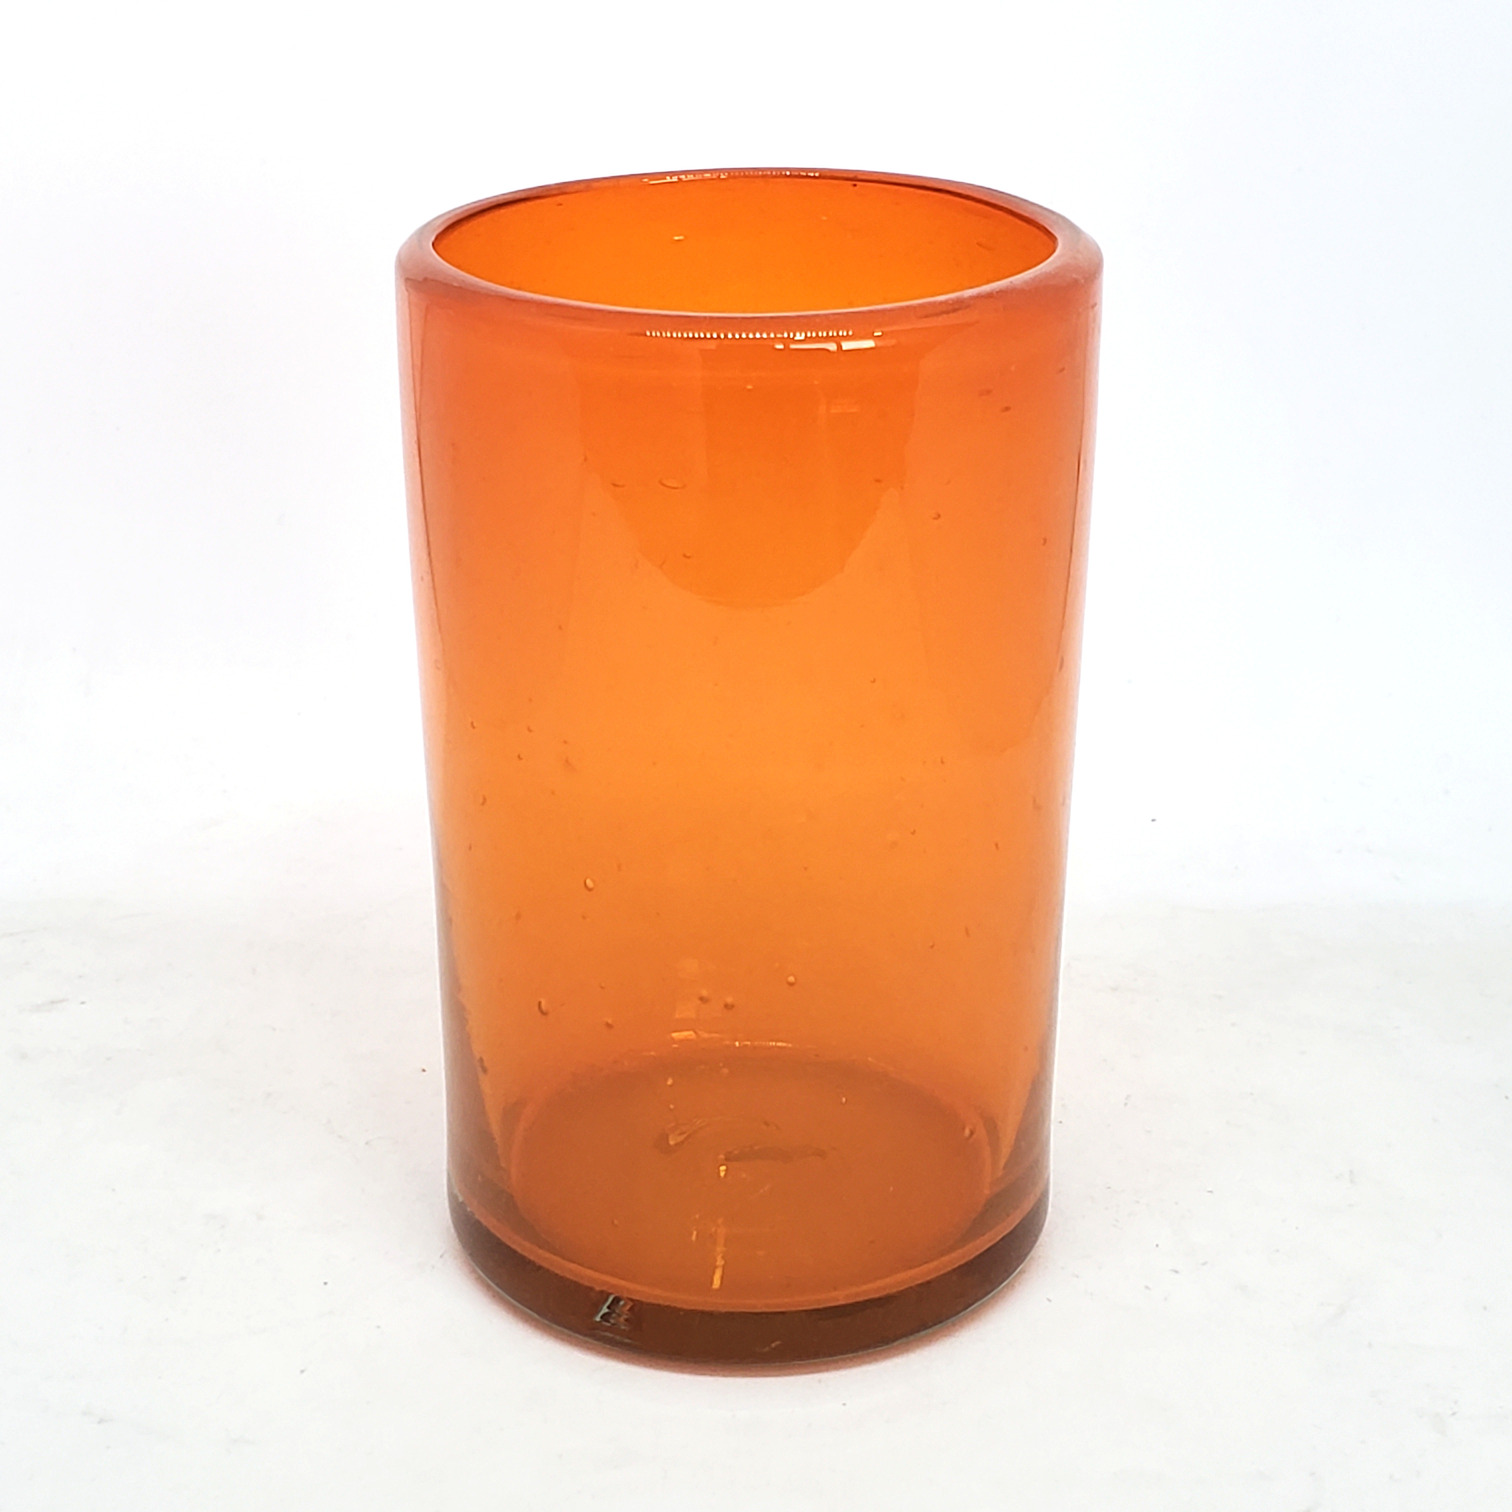 Sale Items / Solid Orange 14 oz Drinking Glasses  / These handcrafted glasses deliver a classic touch to your favorite drink.